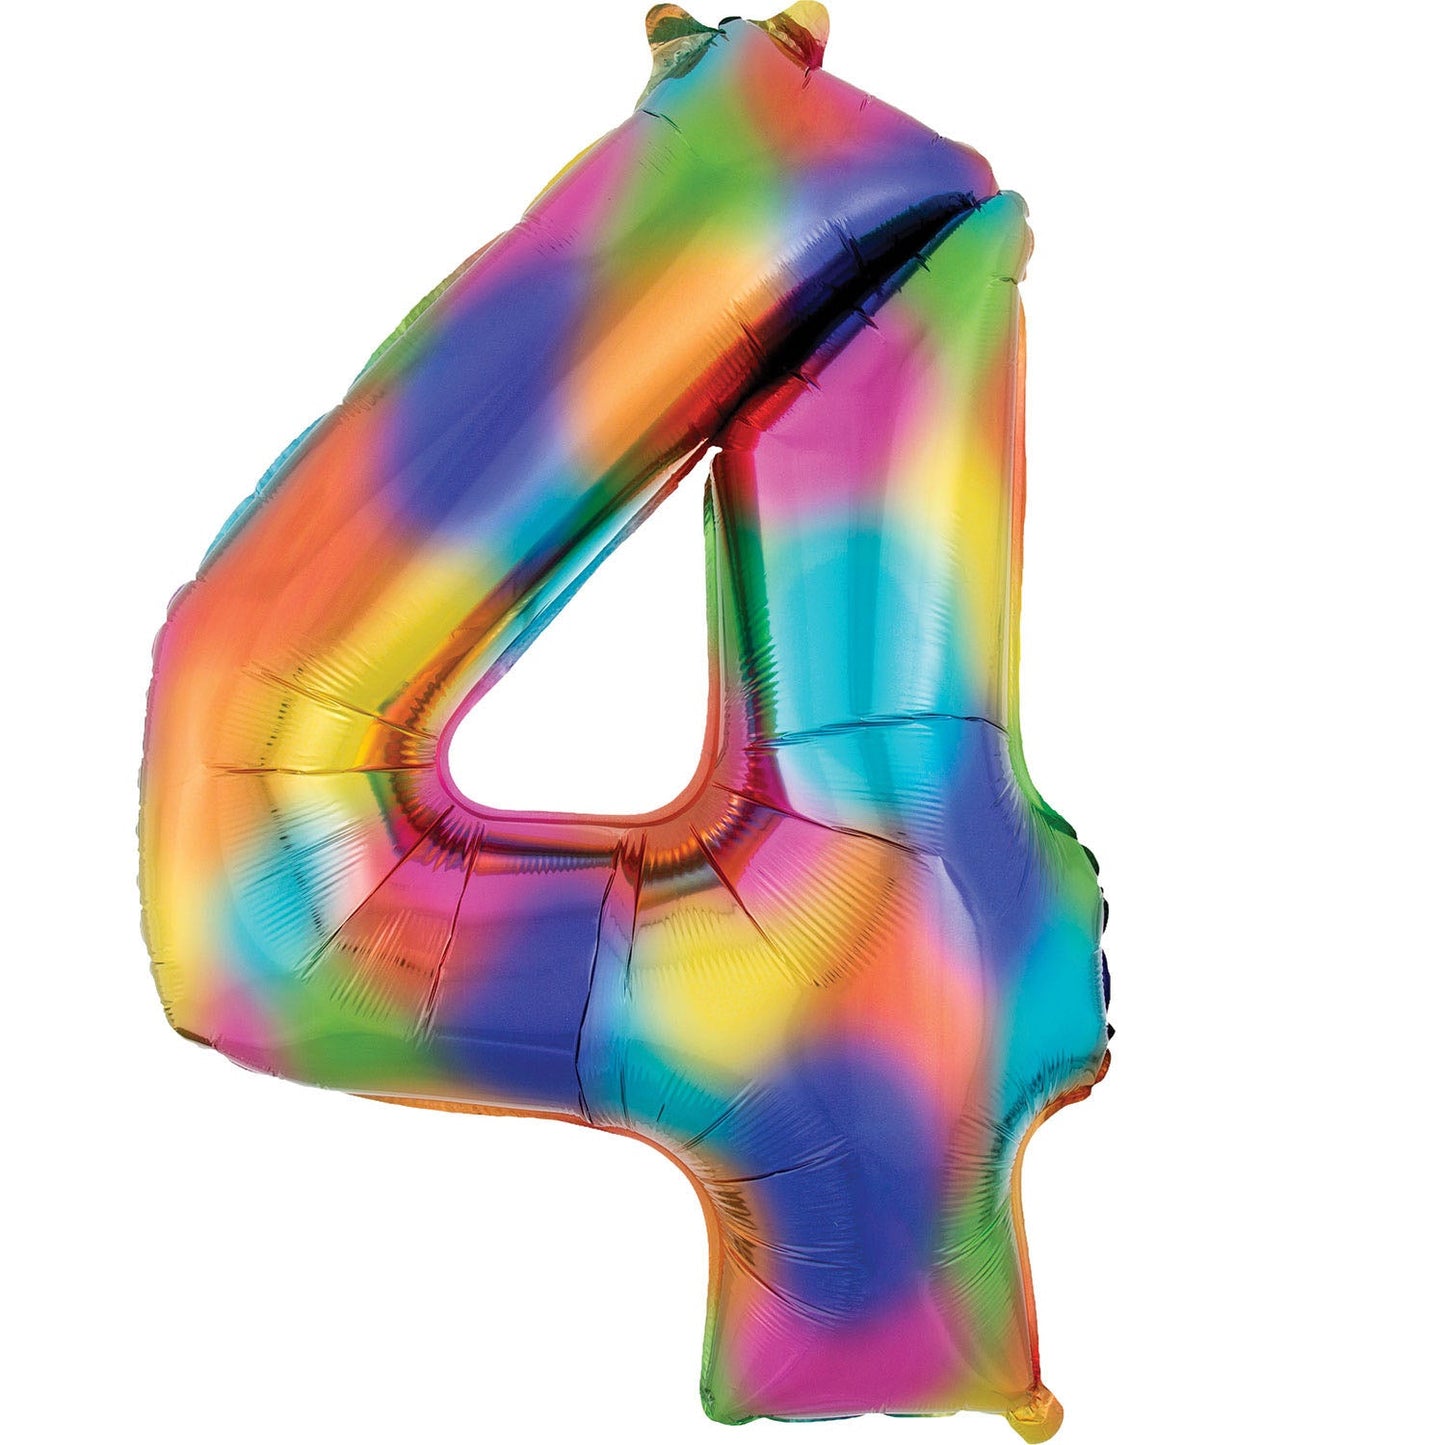 Rainbow Splash Supershape Number 4 Foil Balloon 91cm (36in) height by 60cm (24in) width Balloon is sold uninflated. Can be inflated with air or helium.